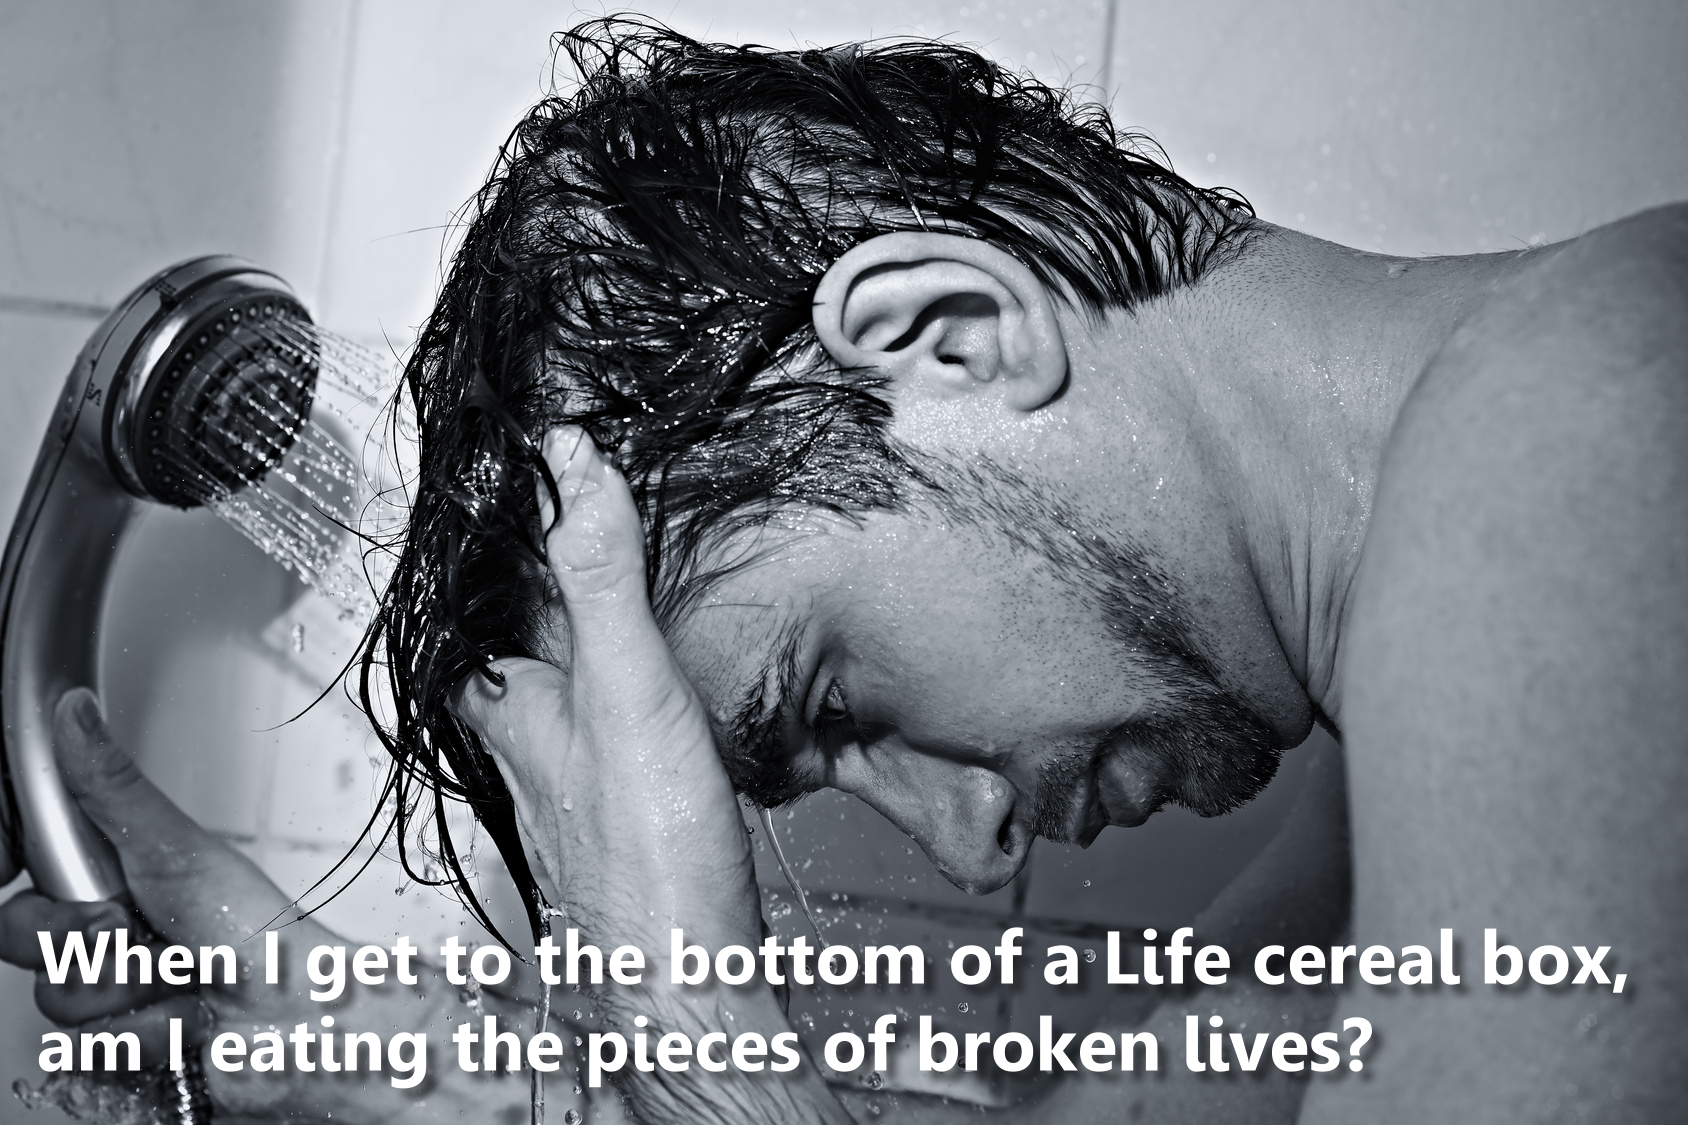 Shower - When I get to the bottom of a Life cereal box, am I eating the pieces of broken lives?